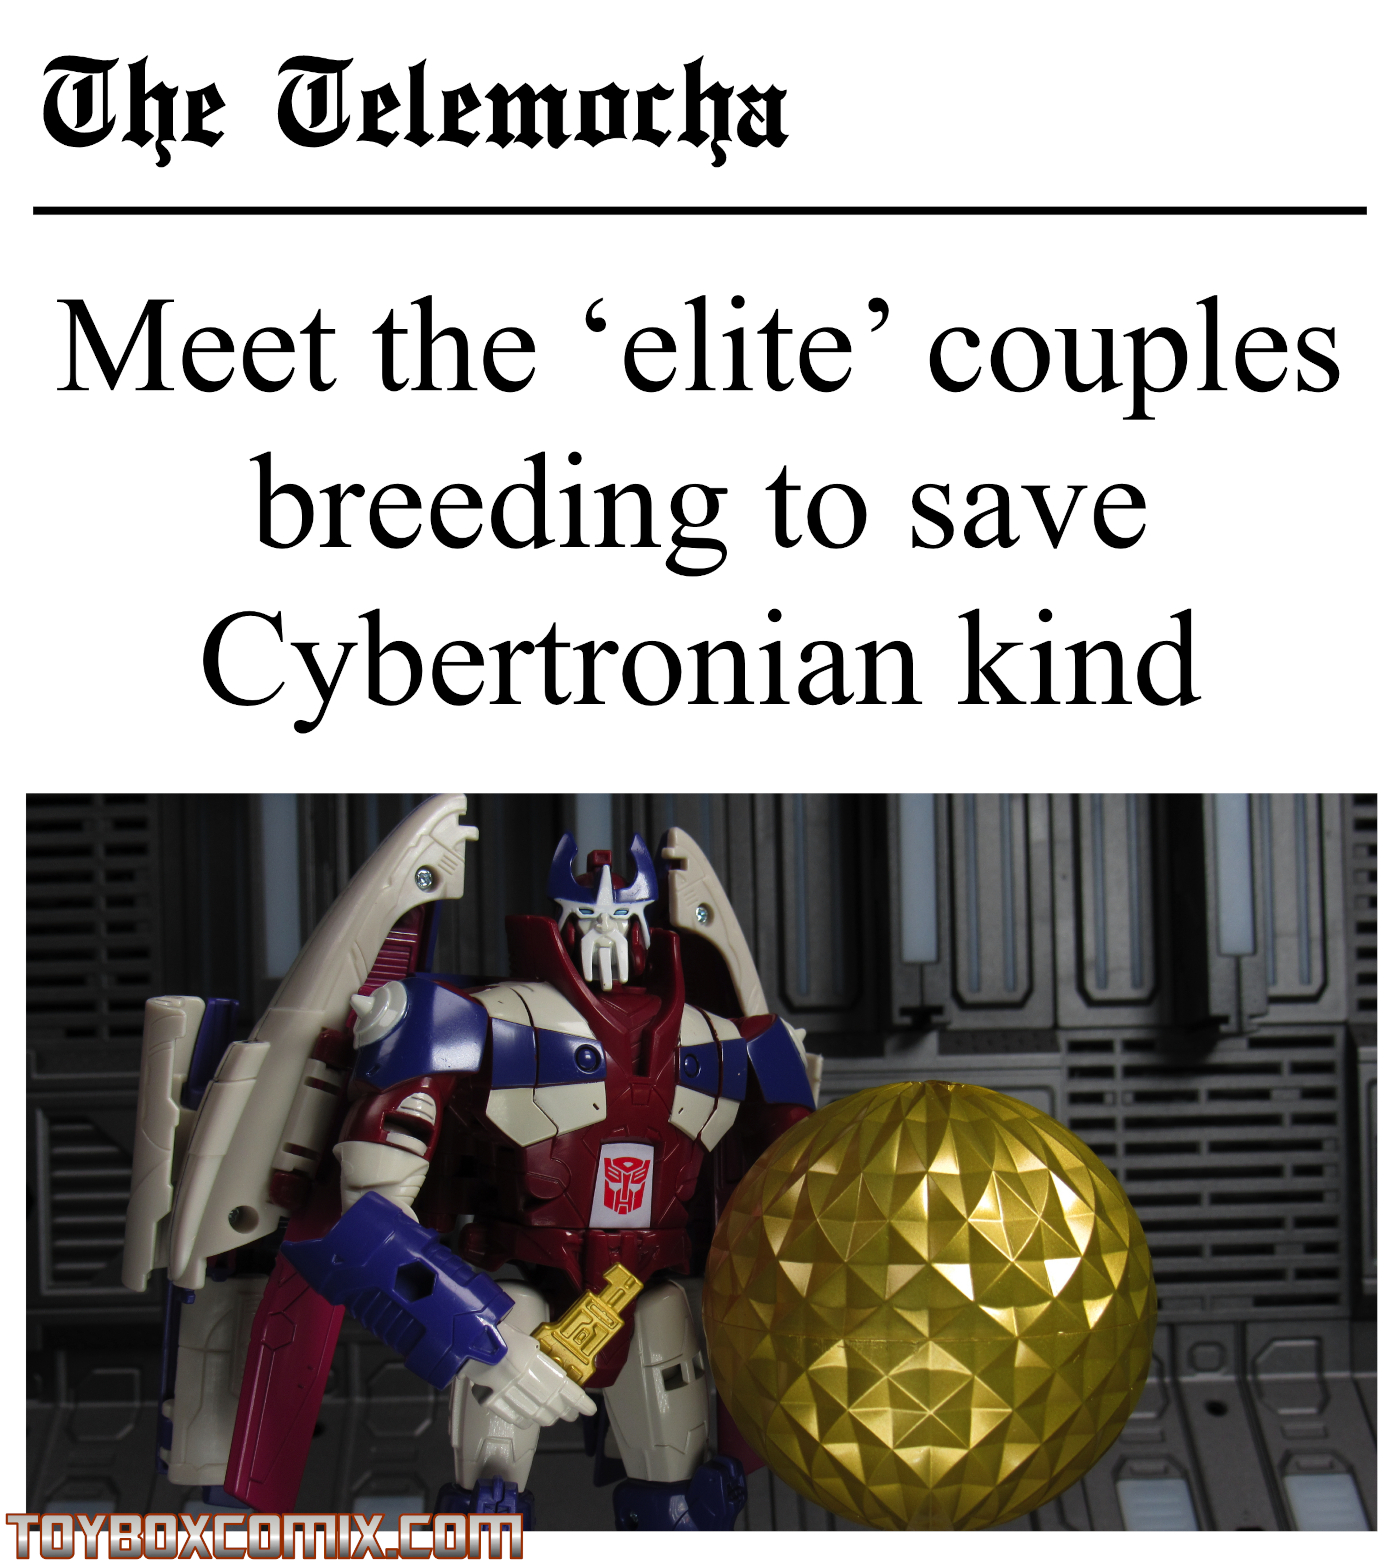 Newspaper title font: “The Telemocha”. Newspaper headline: “Meet the ‘elite’ couples breeding to save Cybertronian kind” followed by a photo of Alpha Trion and Vector Sigma.